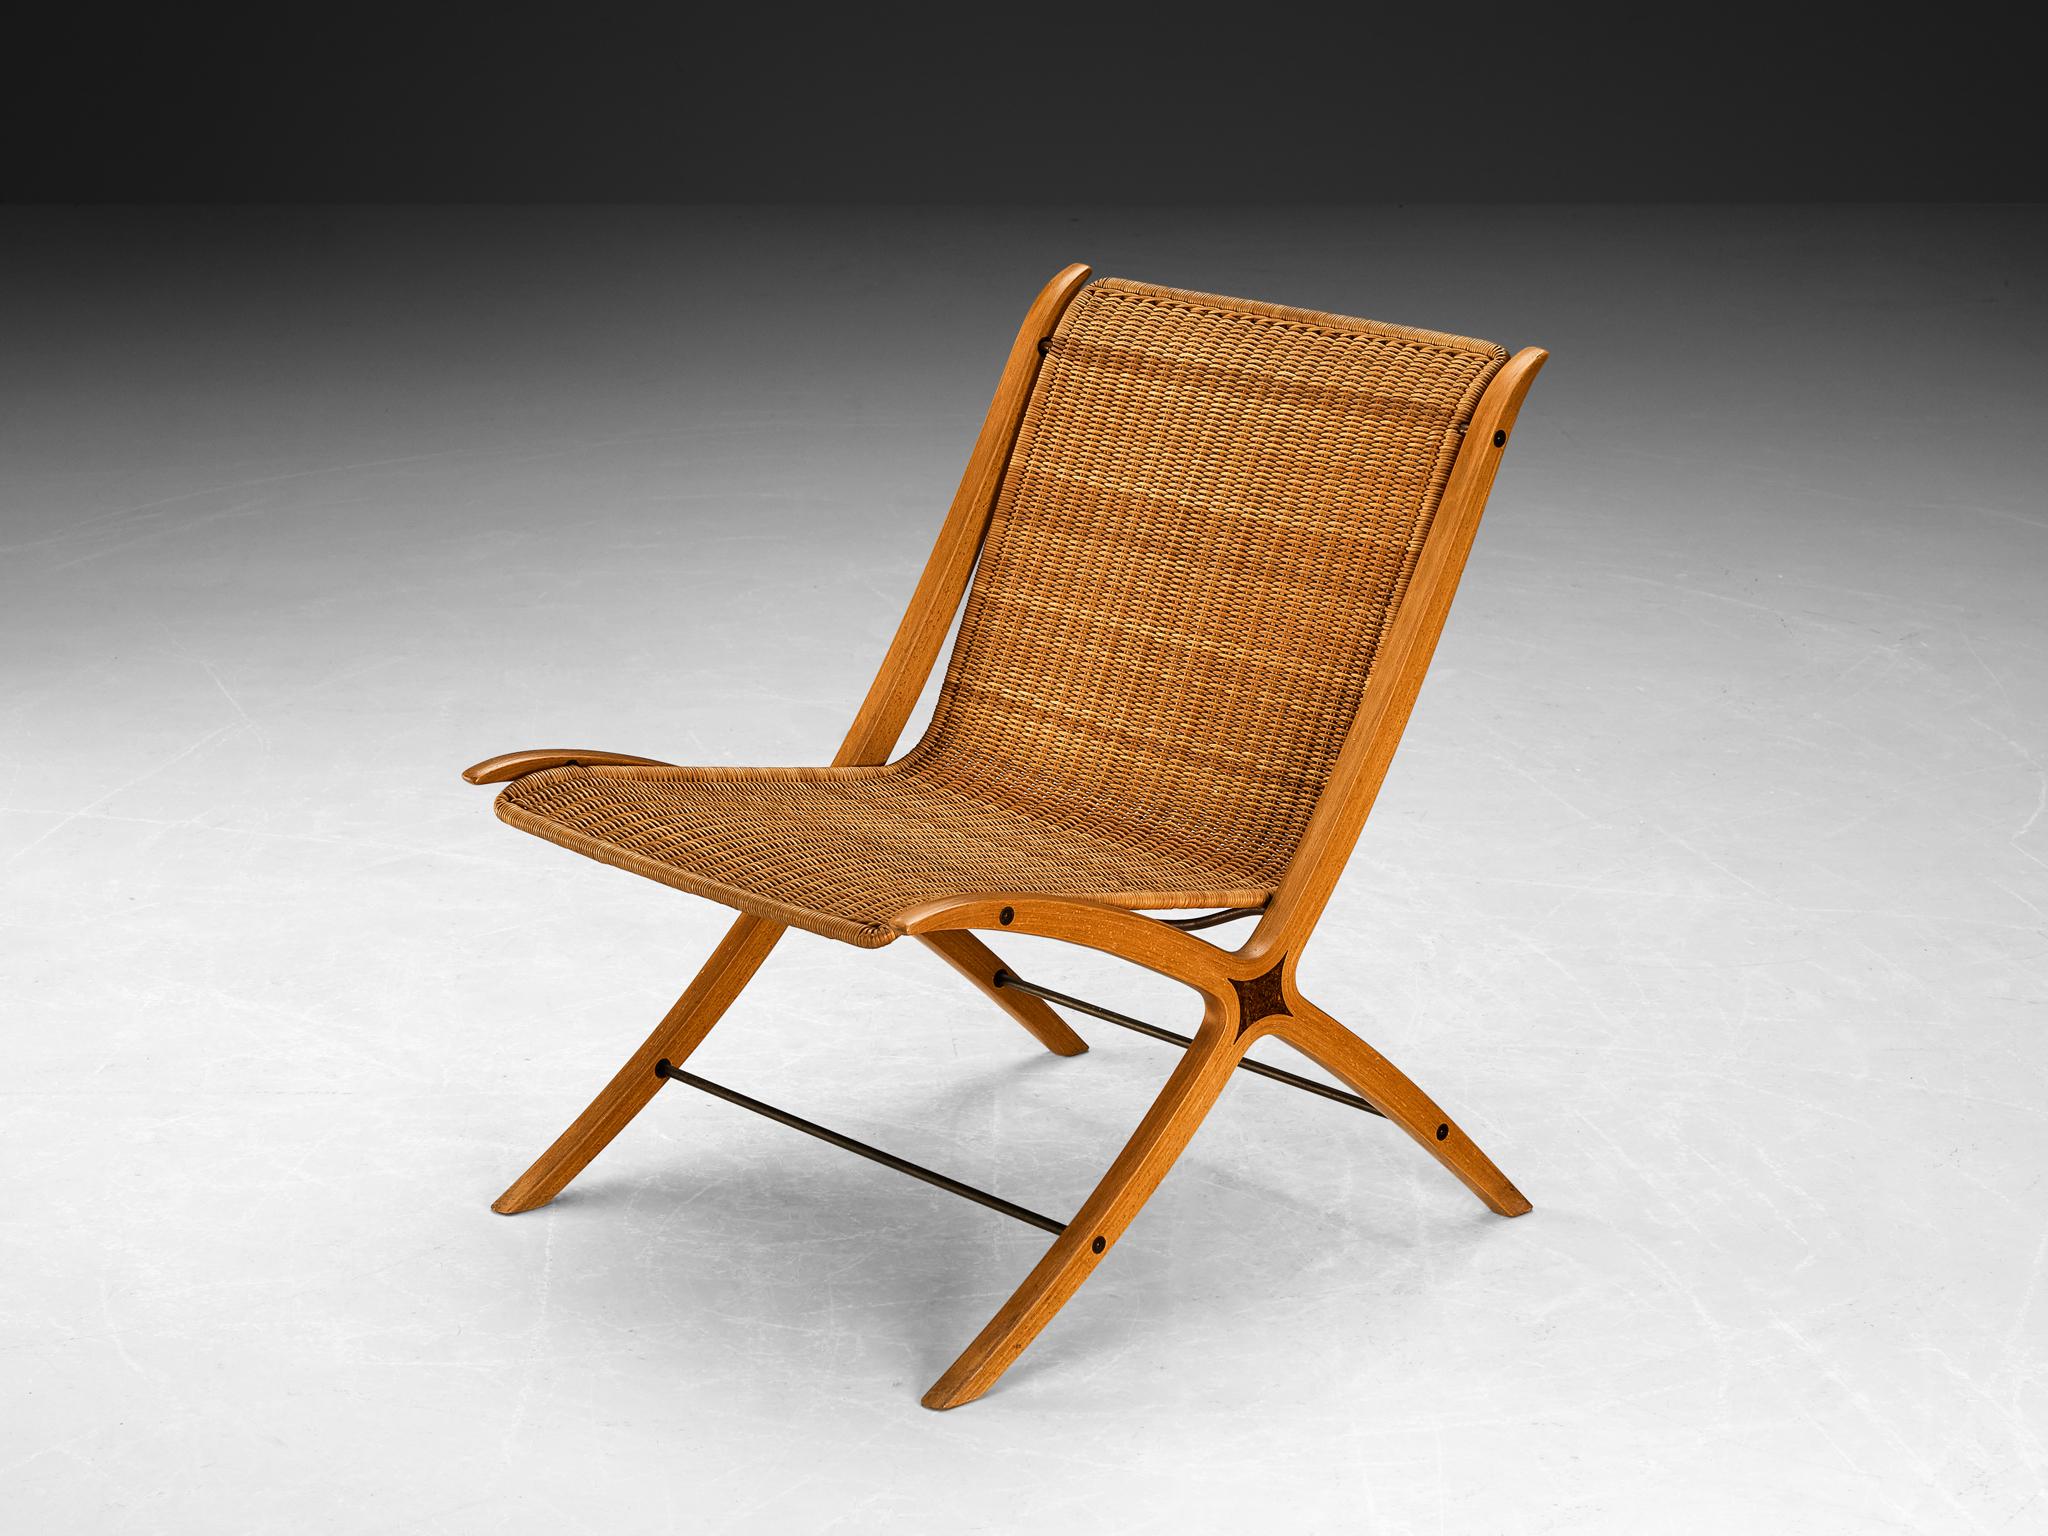 Peter Hvidt & Orla Mølgaard Nielsen for Fritz Hansen, 'X-chair model '6103', cane, wood, beech, Denmark, designed in 1958

This chair is for obvious reasons nicknamed the 'X-chair'. The detailing of this X-design runs all the way from the front legs